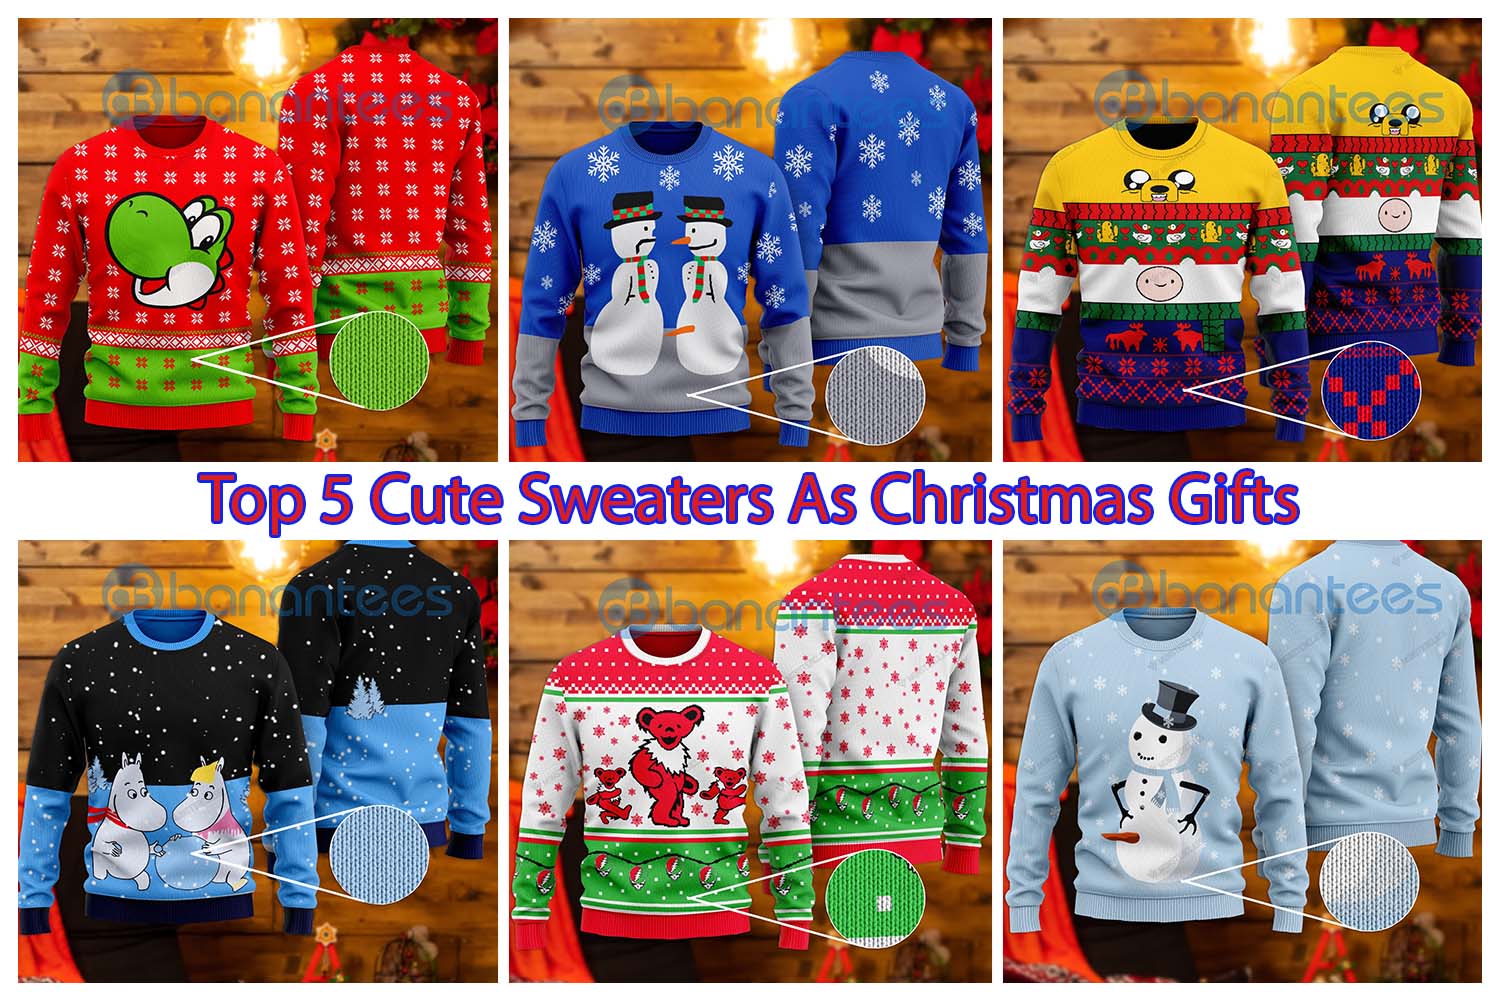 Top 6 Cute Sweaters As Christmas Gifts